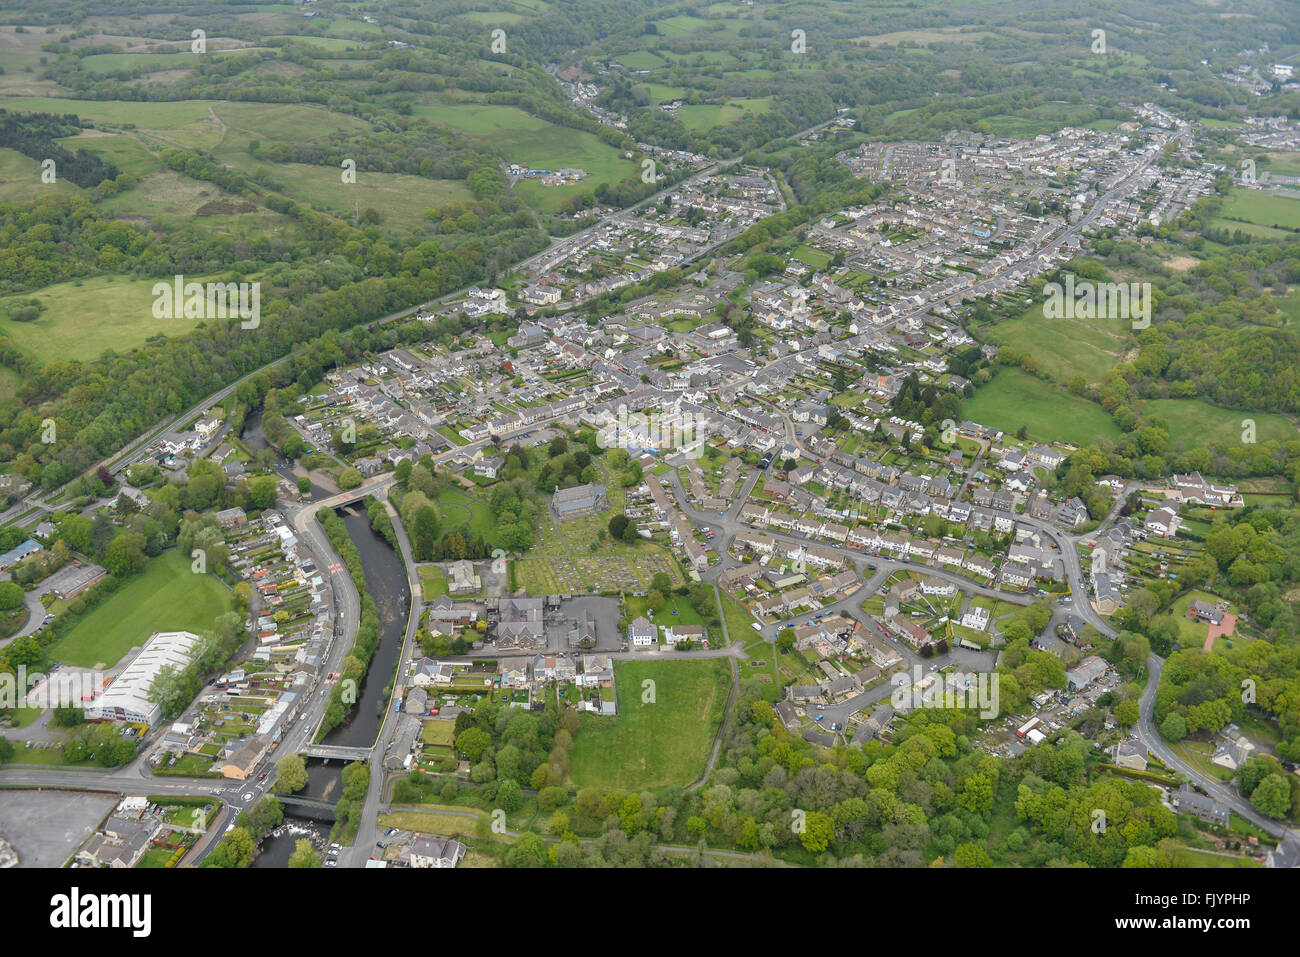 An aerial view of Ystradgynlais, a town in South Wales Stock Photo